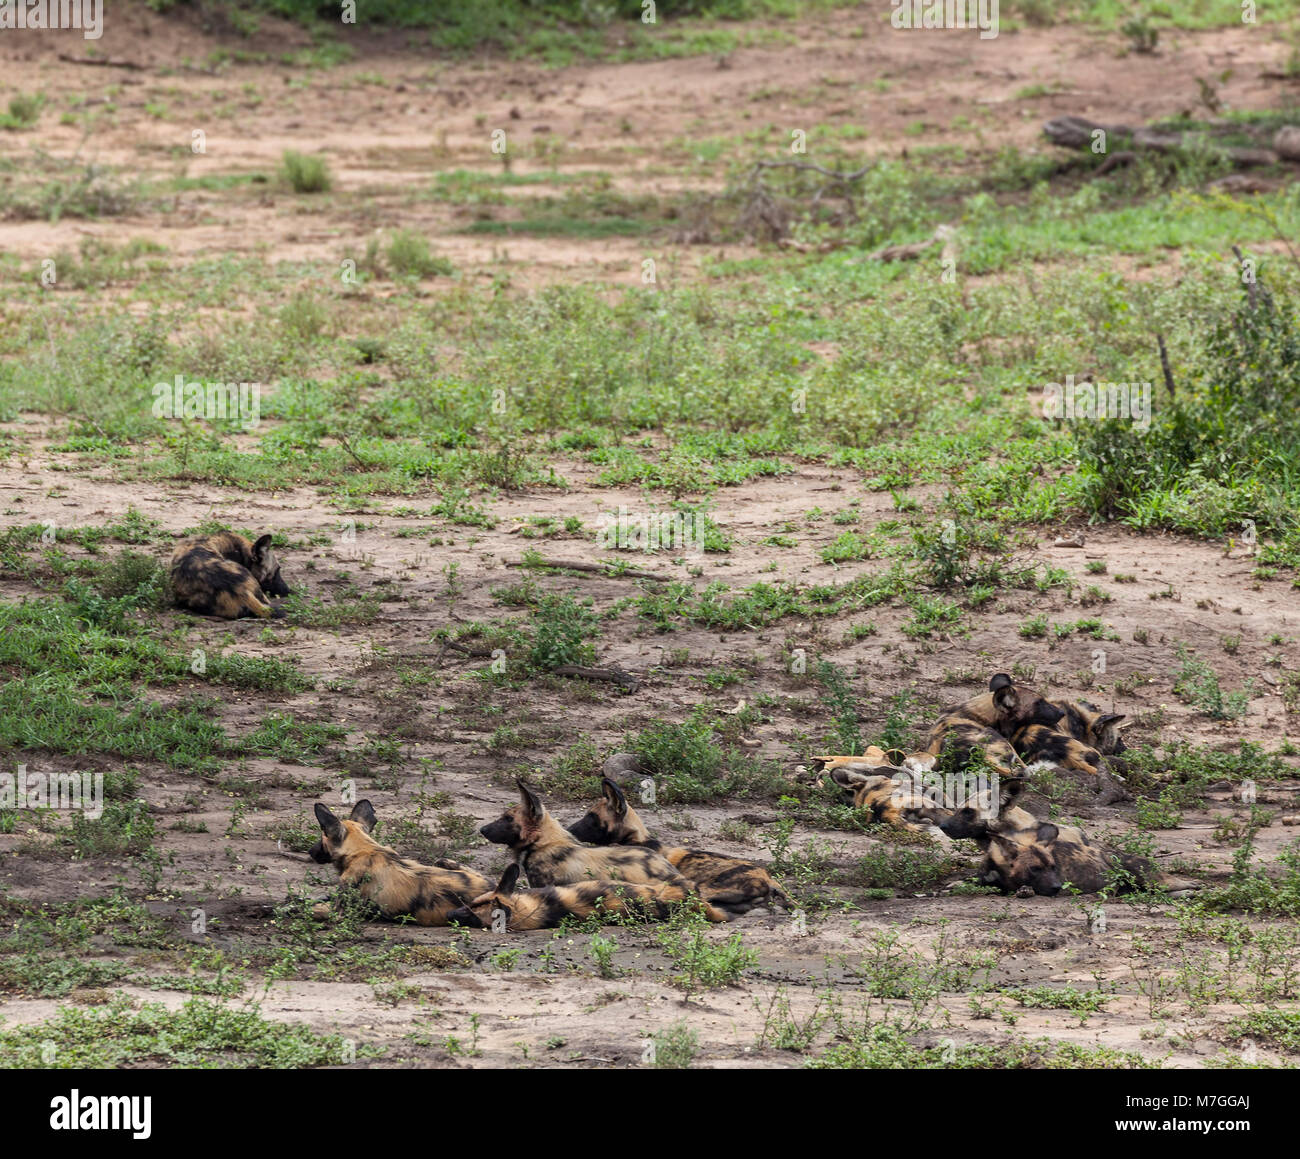 Ten members of a pack of African Wild Dogs, Lycaon pictus, resting (some alert) in shade in Kruger NP, South Africa Stock Photo